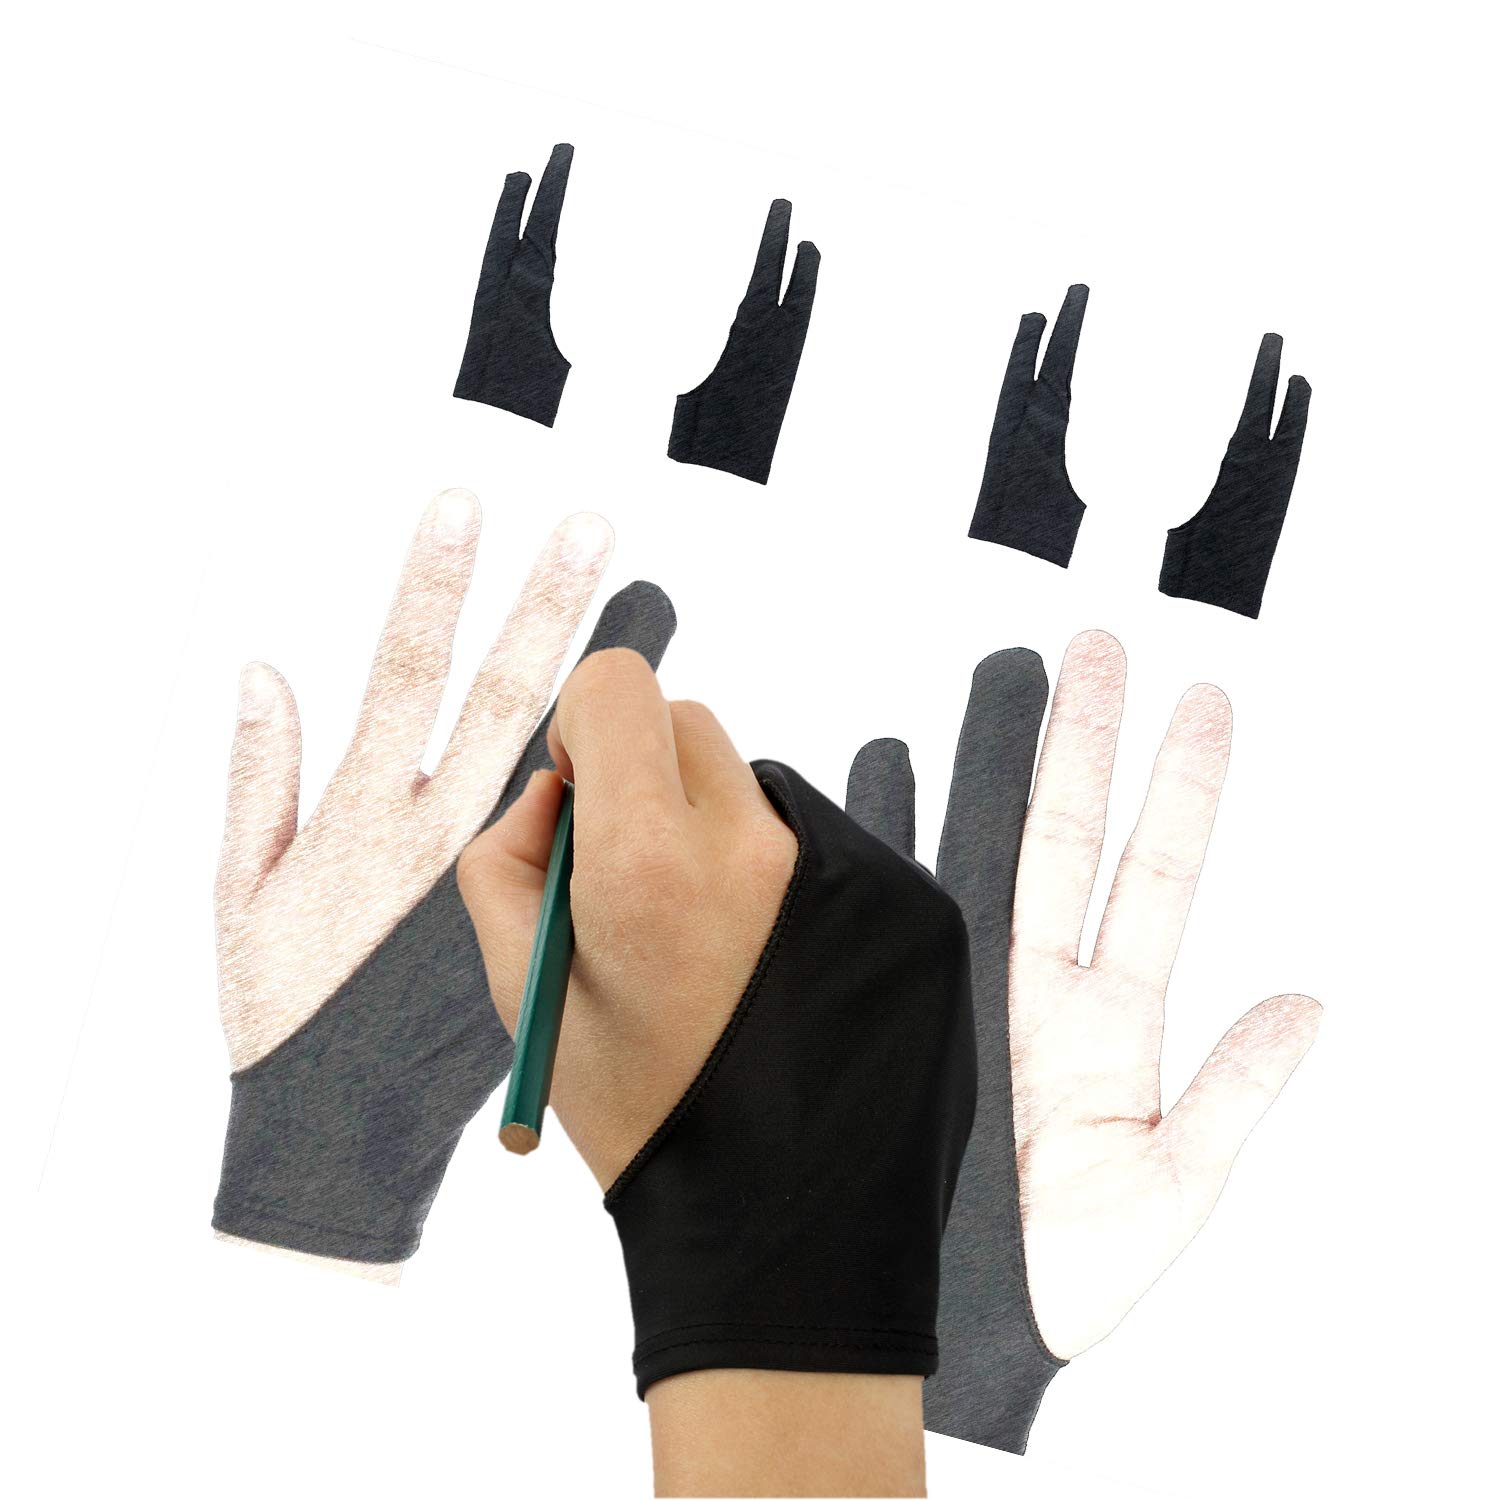 Asonen - Artist Gloves for Drawing 4 Pack, Two Fingers Gloves for Graphics  Tablets Drawing or Paper Sketching, Universal Right and Left Hands